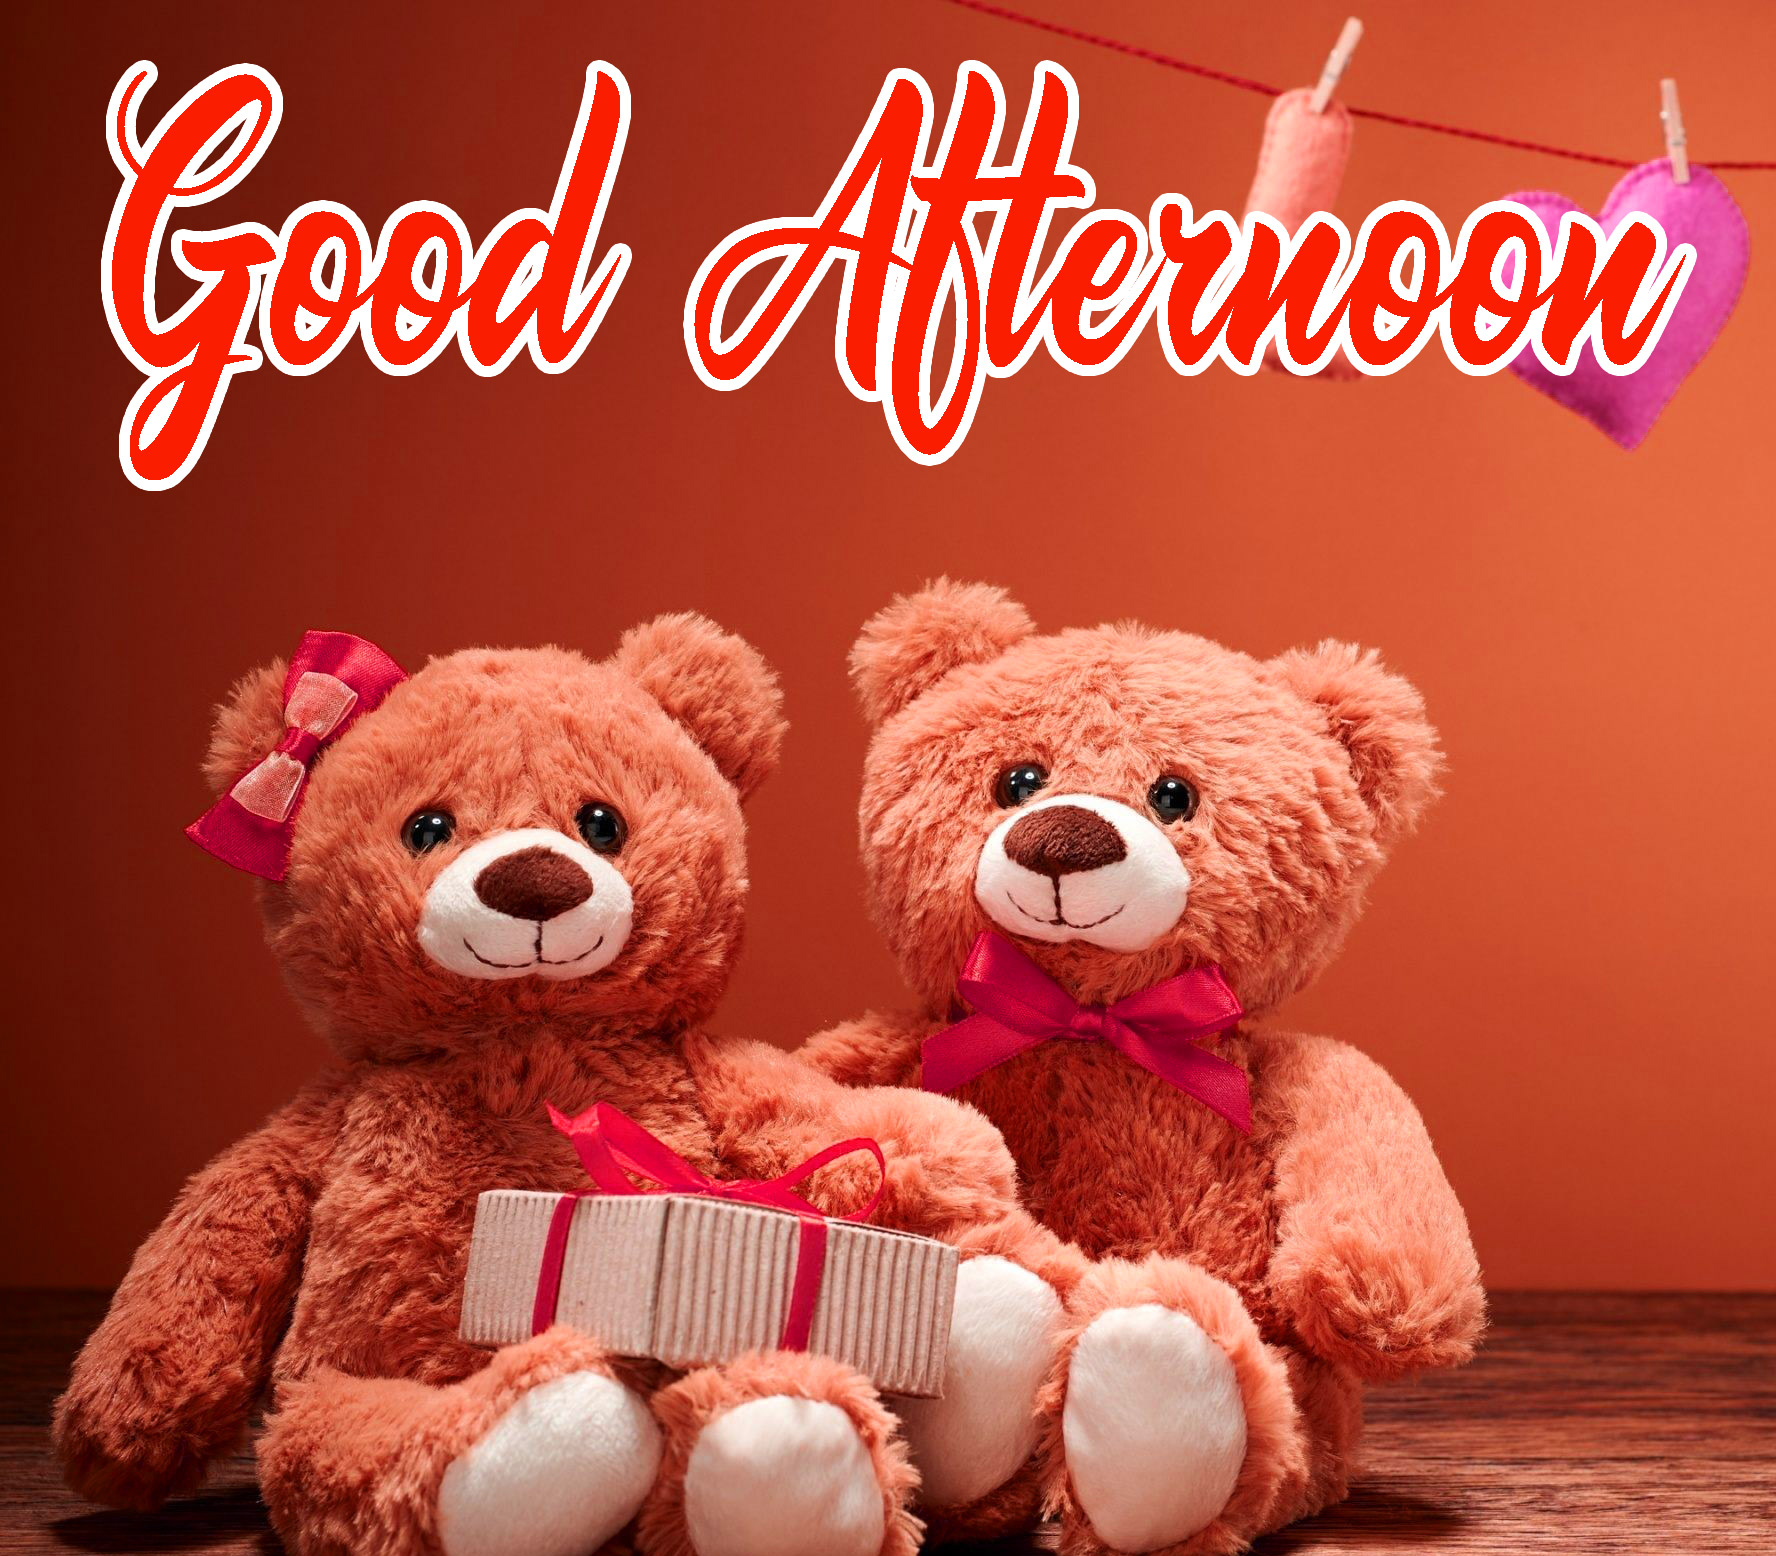 Free Good Afternoon HD Images Wallpaper Download 